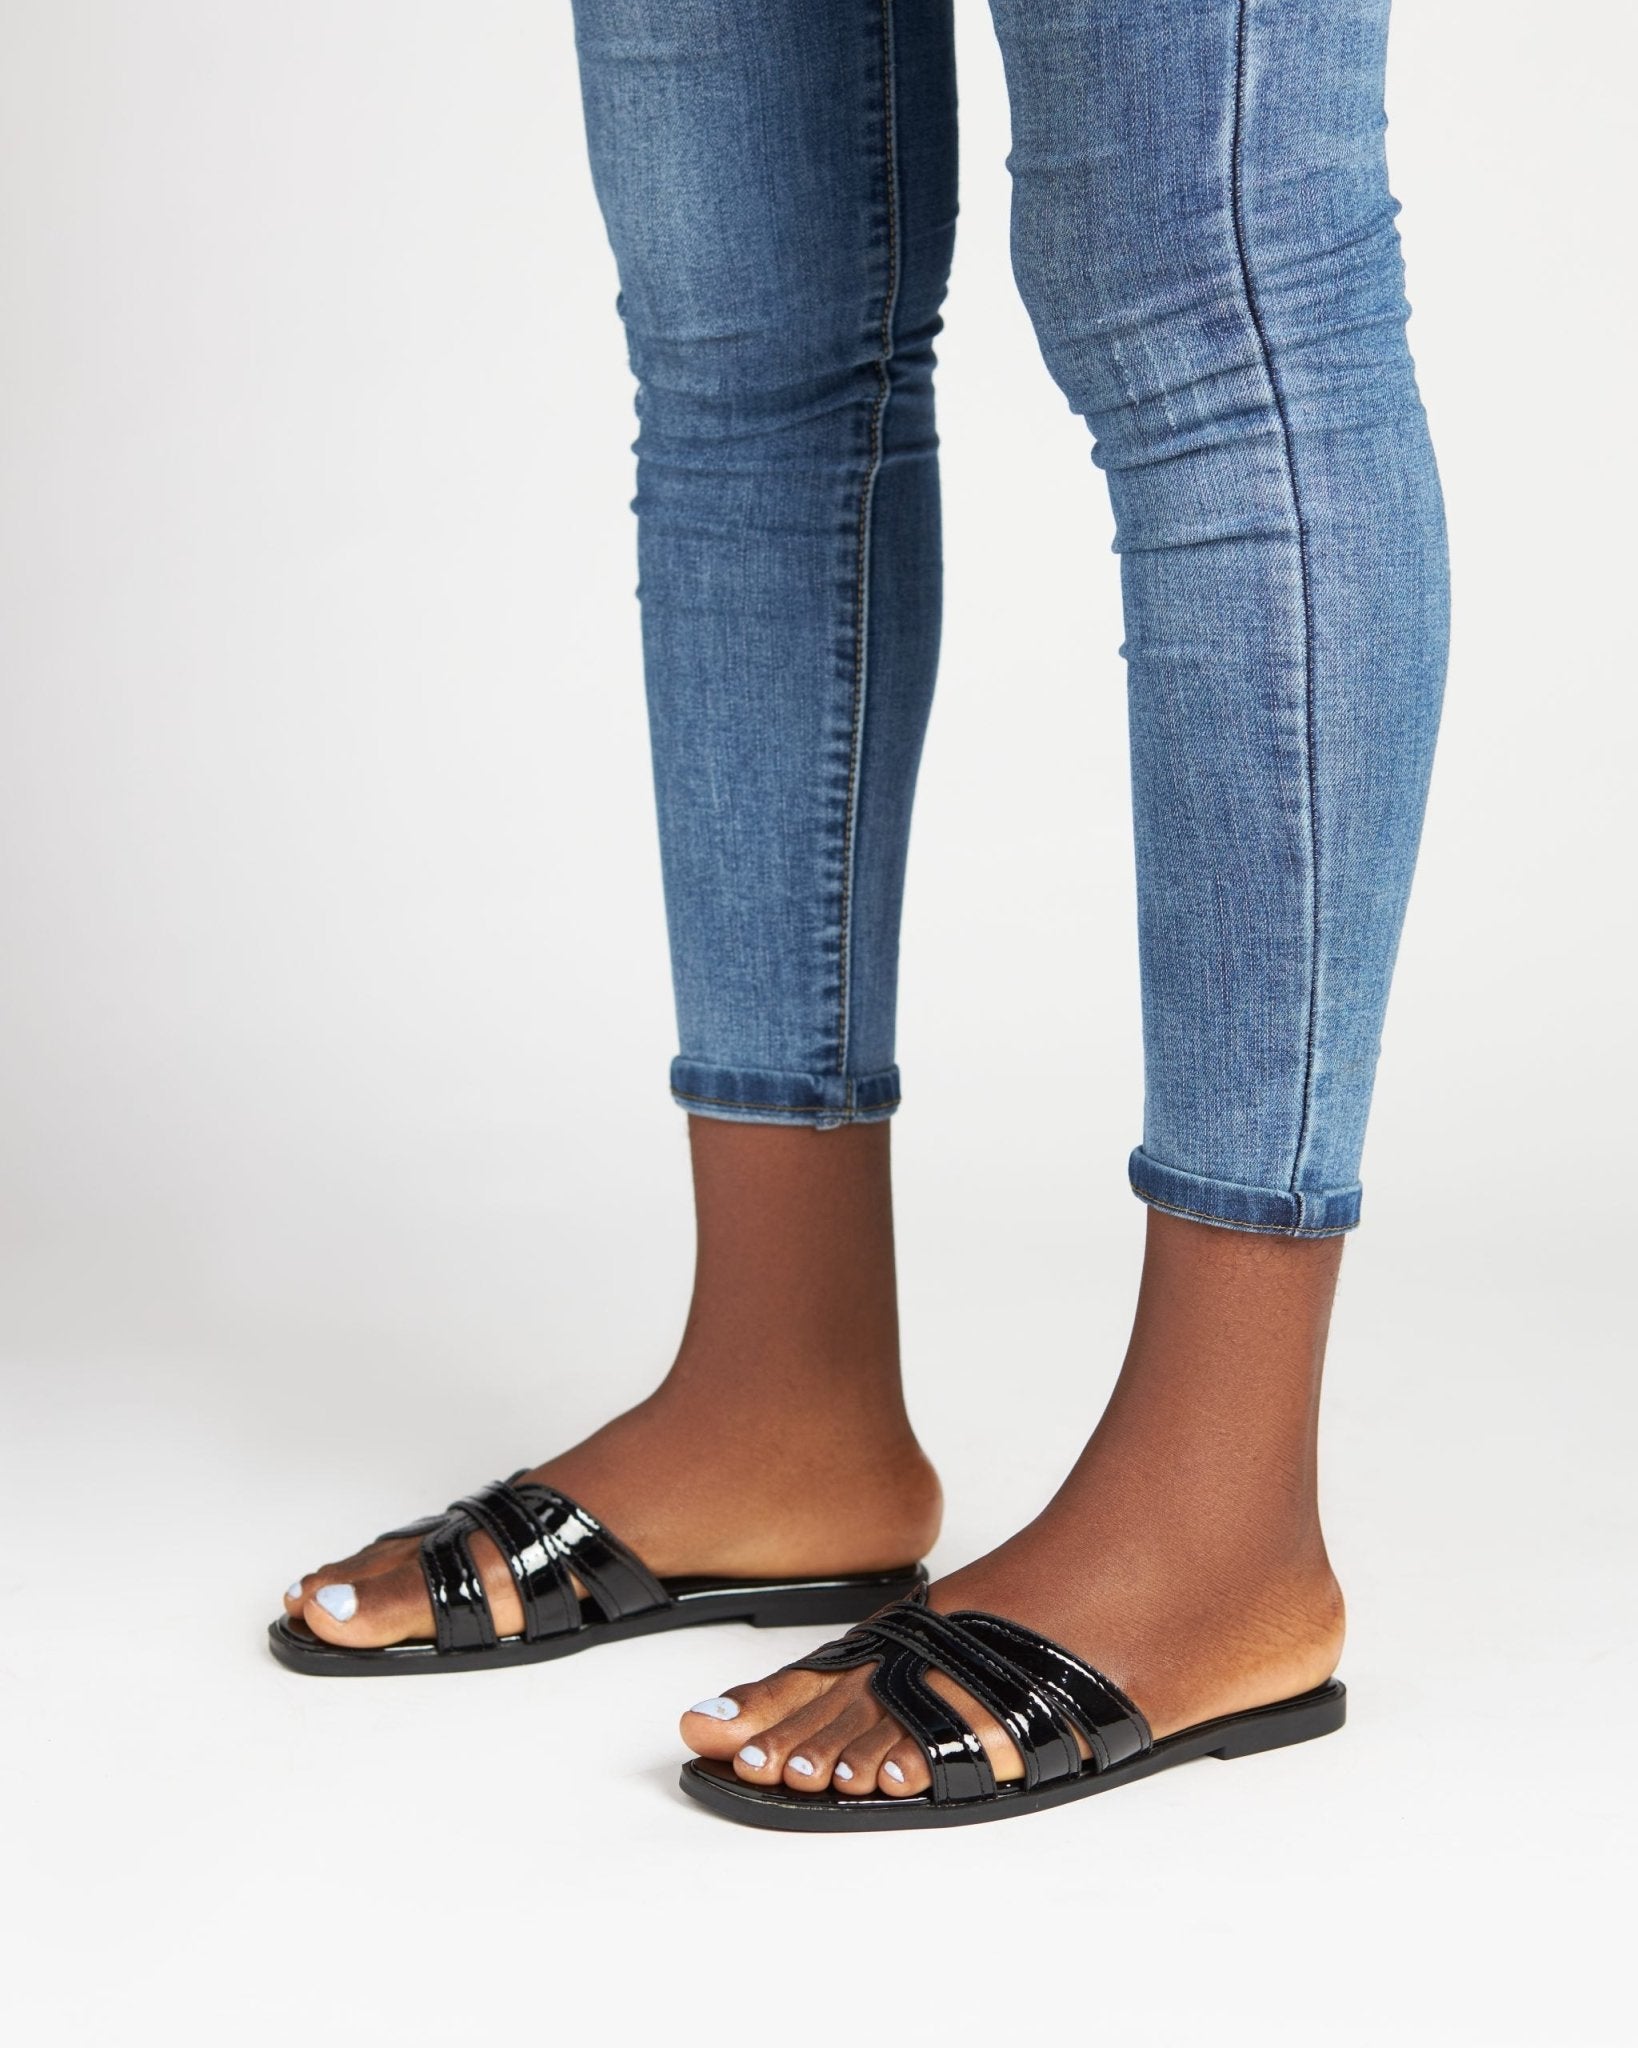 Chic Leather Slides in Black - Outlash brand